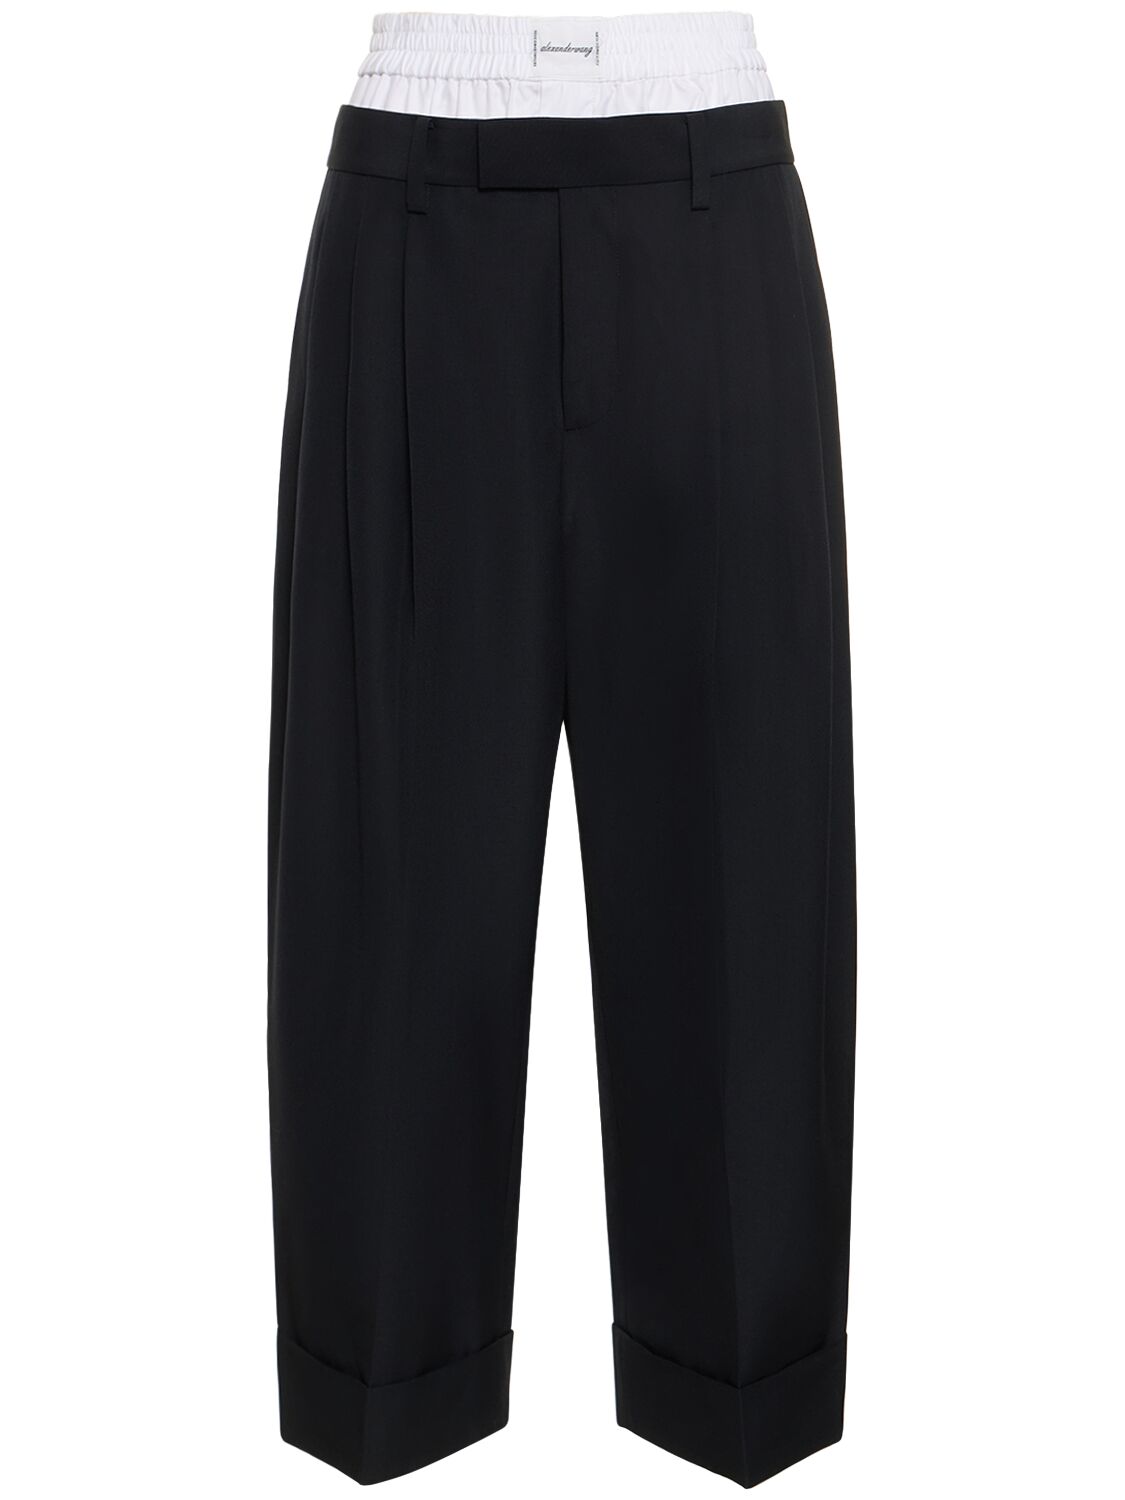 ALEXANDER WANG TAILORED WOOL PANTS W/EXPOSED BOXER